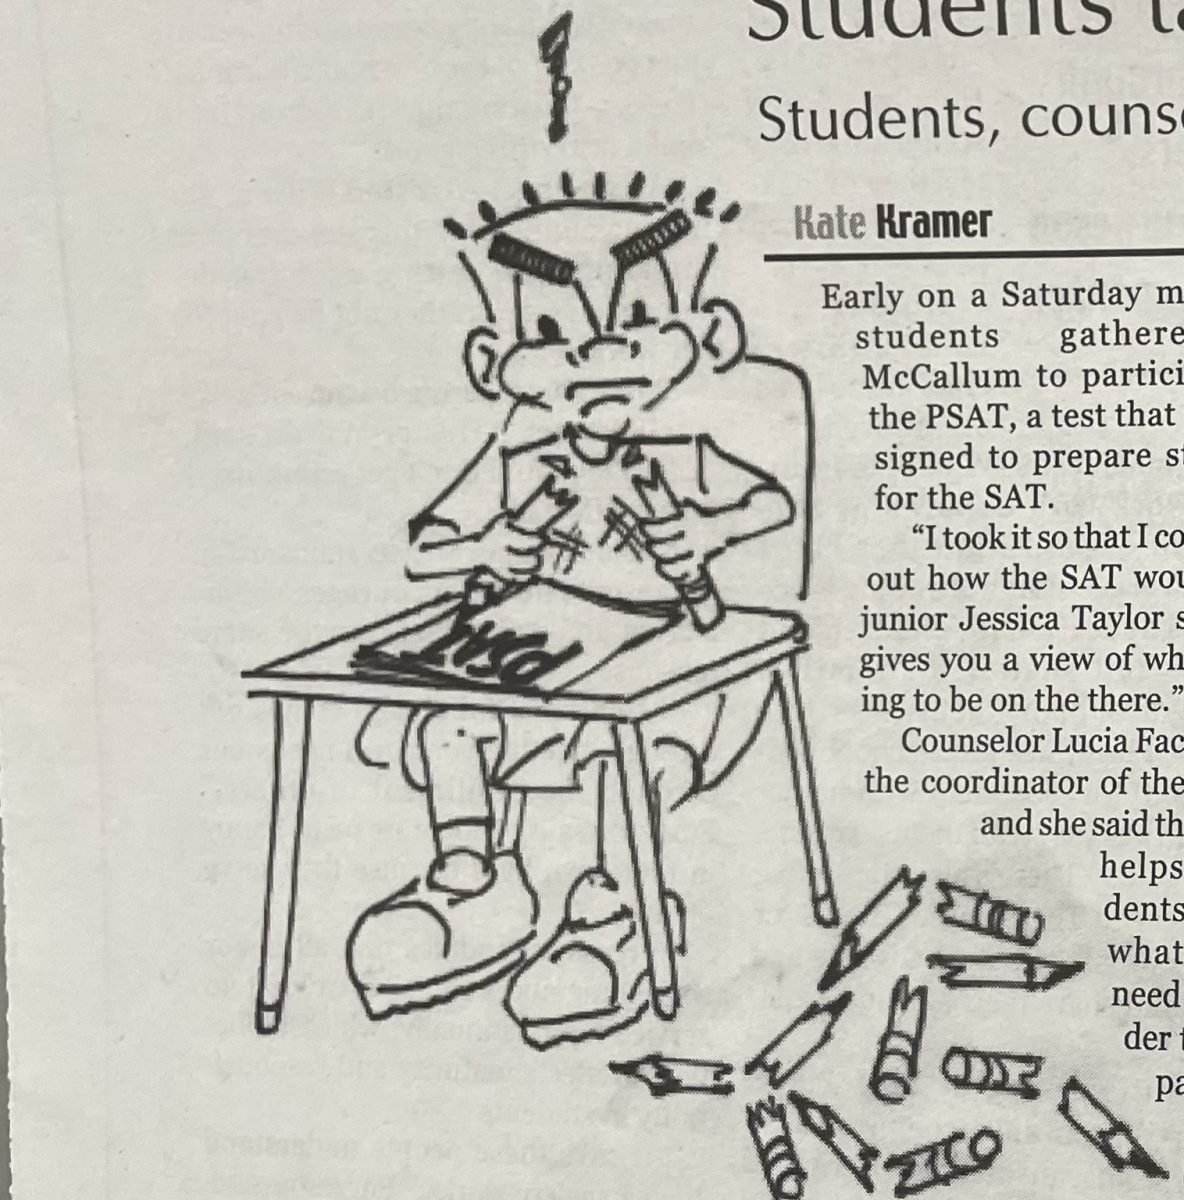 For the unprepared, the SAT can be quite the frustrating experience.